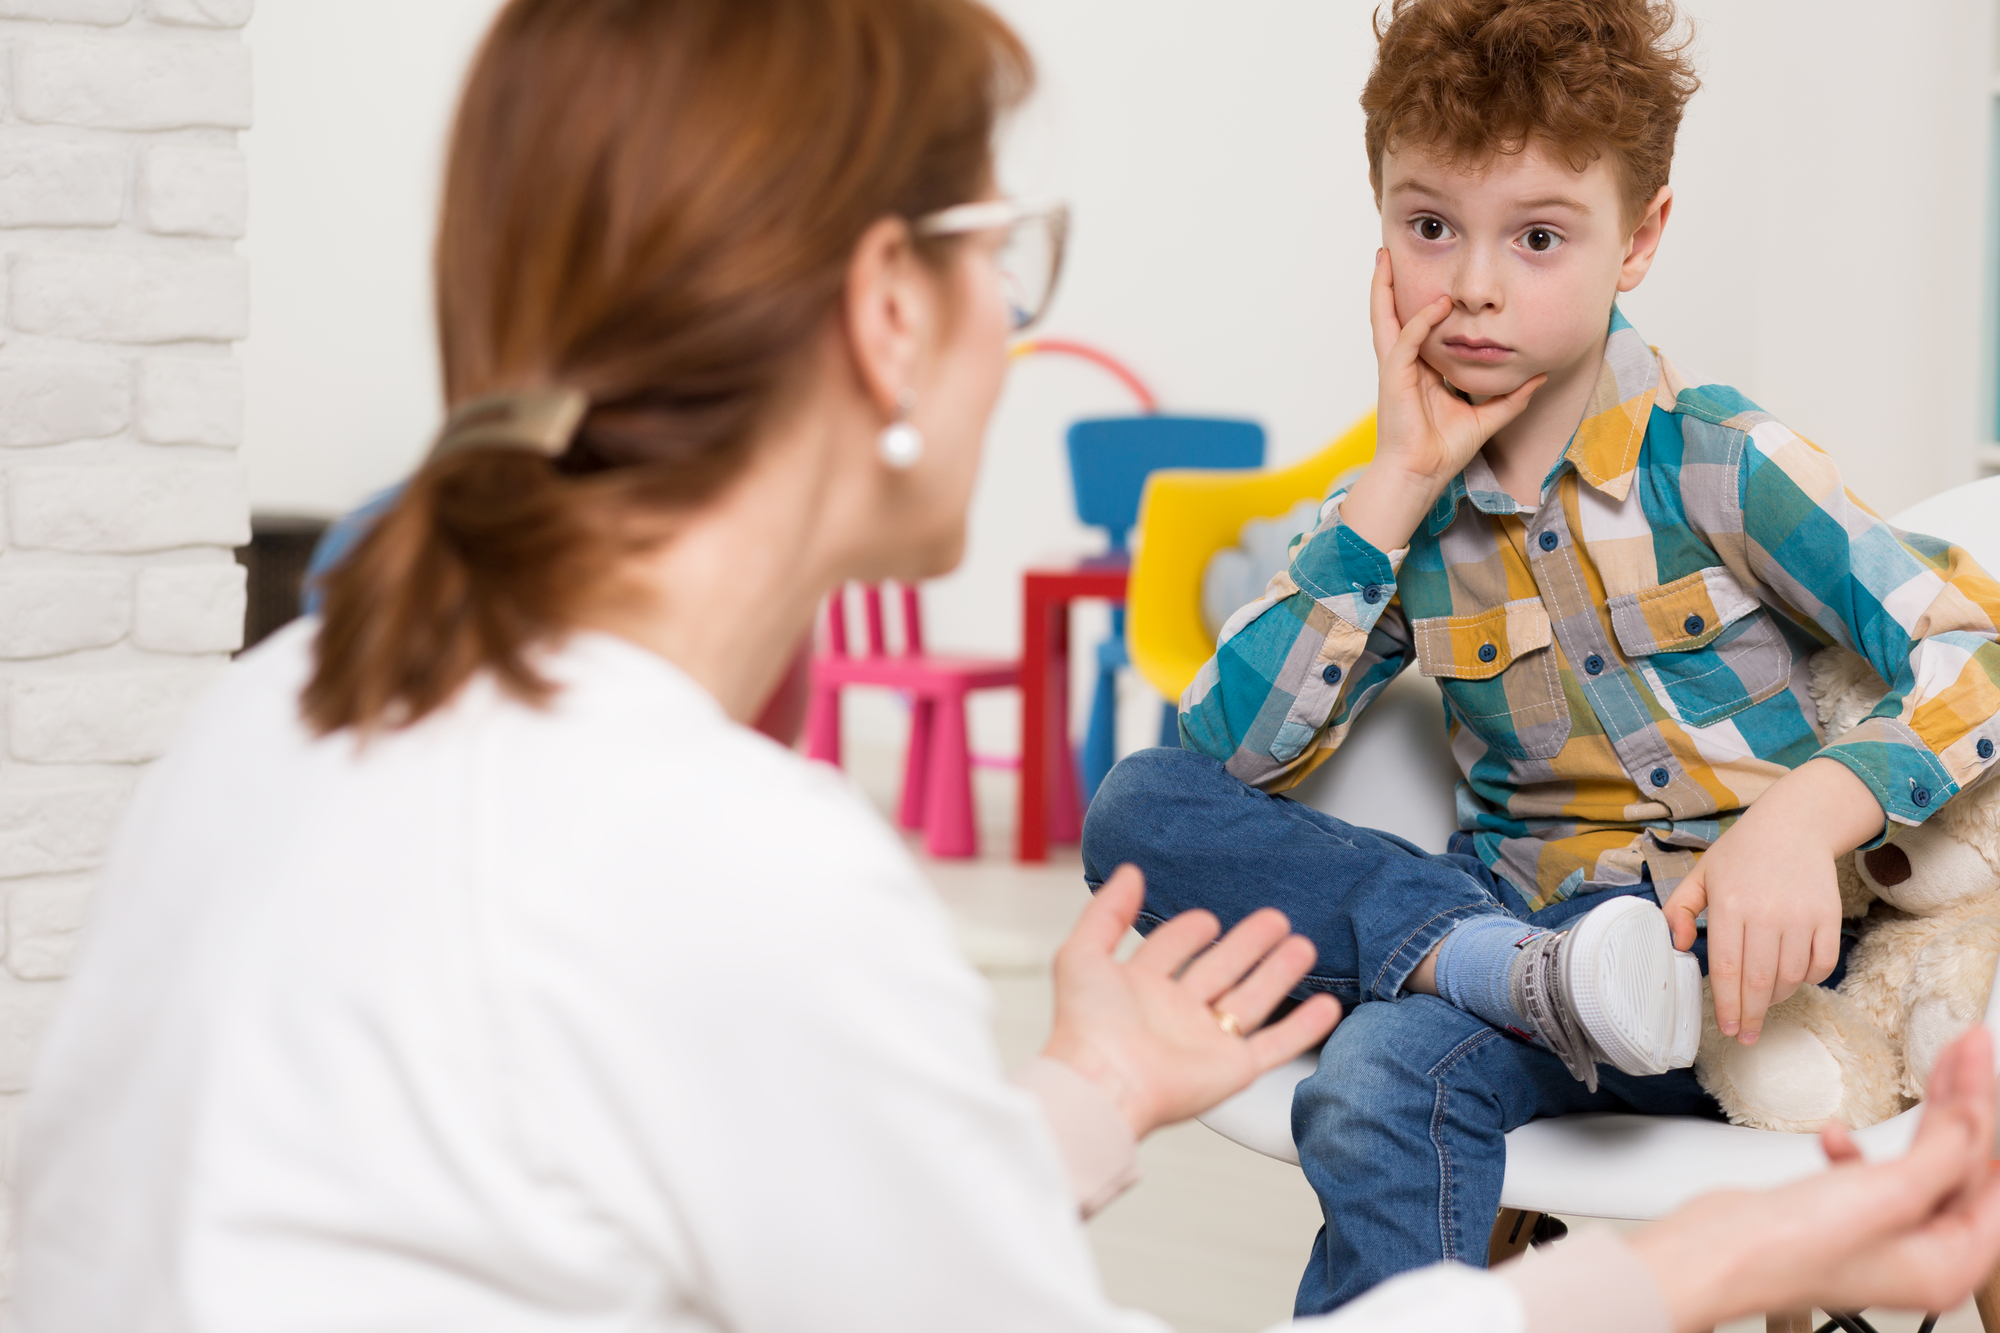 ADHD and medication for kids